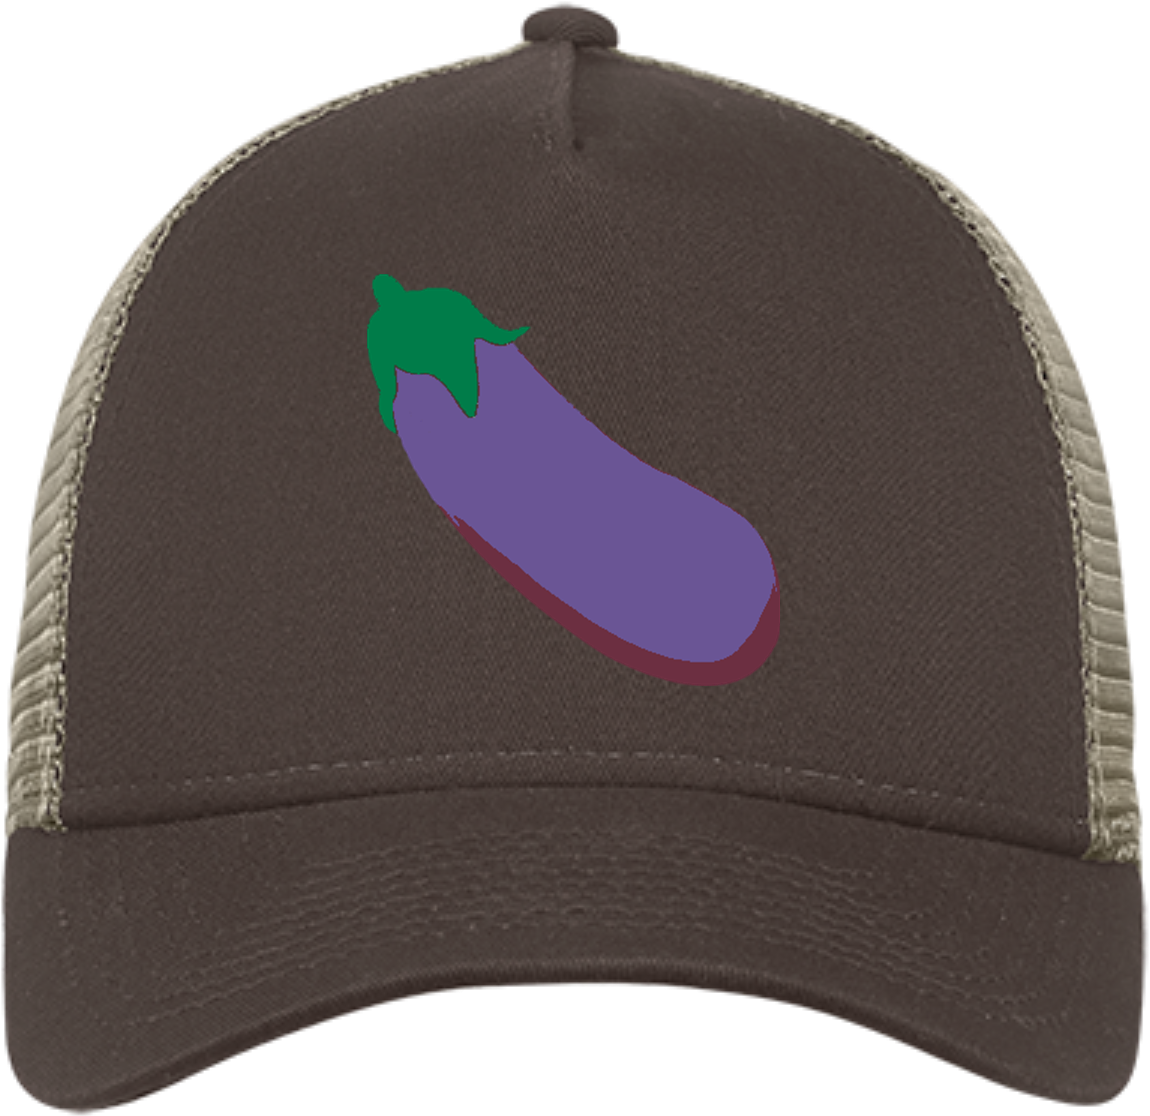 A Hat With A Purple Eggplant On It